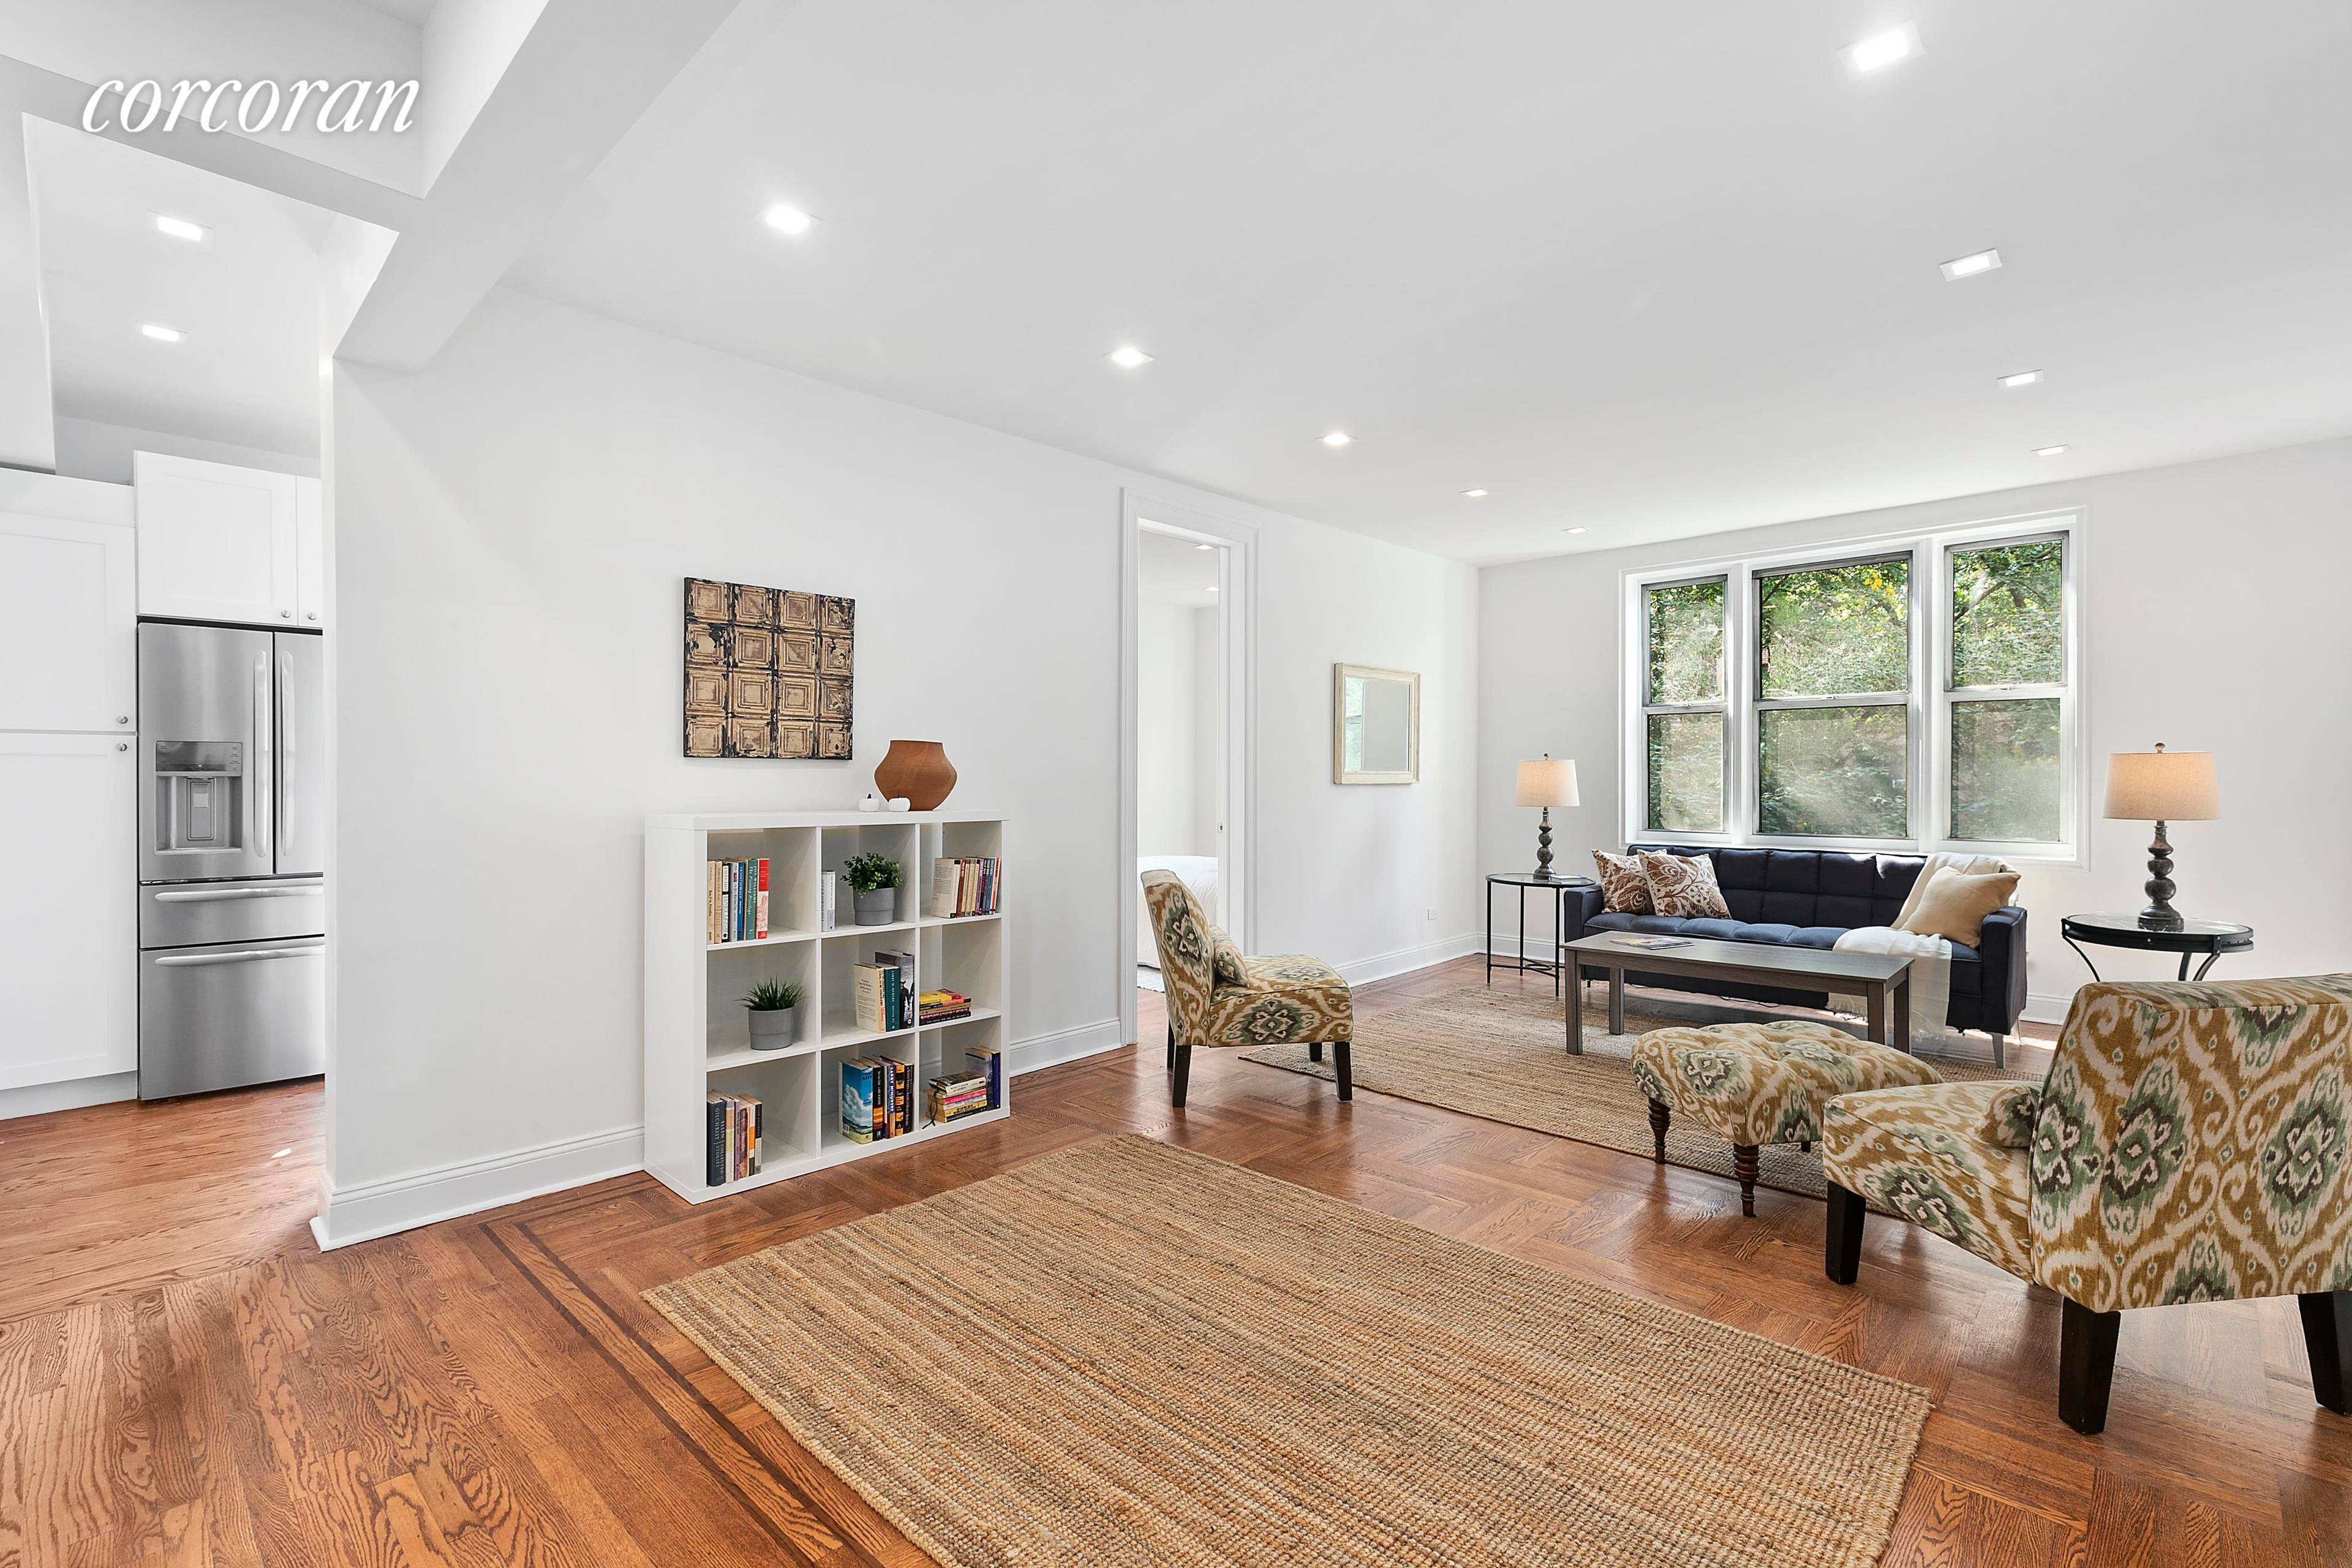 225 Park Place, unit 4C, is an exquisitely renovated, perfectly located TWO BEDROOM coop, sited on the cusp of two of Brooklyn's favorite neighborhoods PROSPECT HEIGHTS and Park Slope.